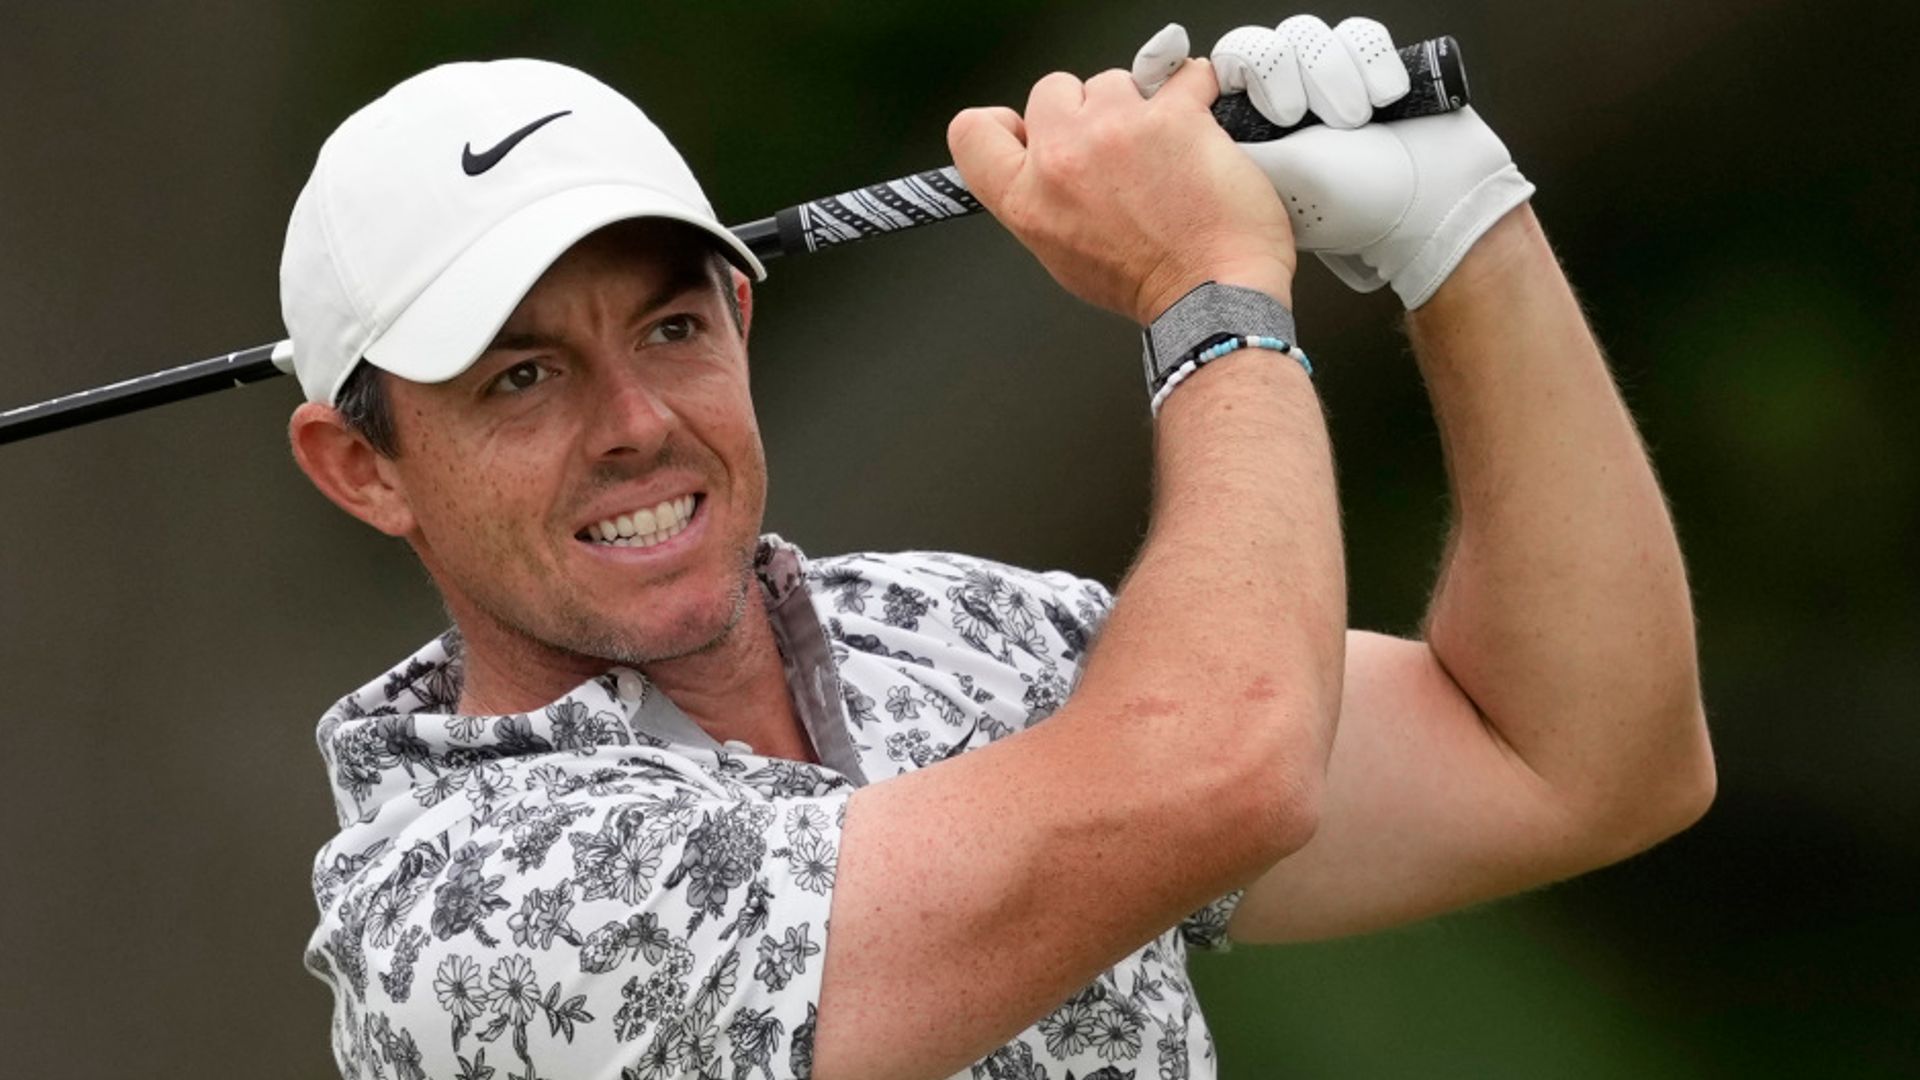 McIlroy on LIV rebels: They say one thing, do another